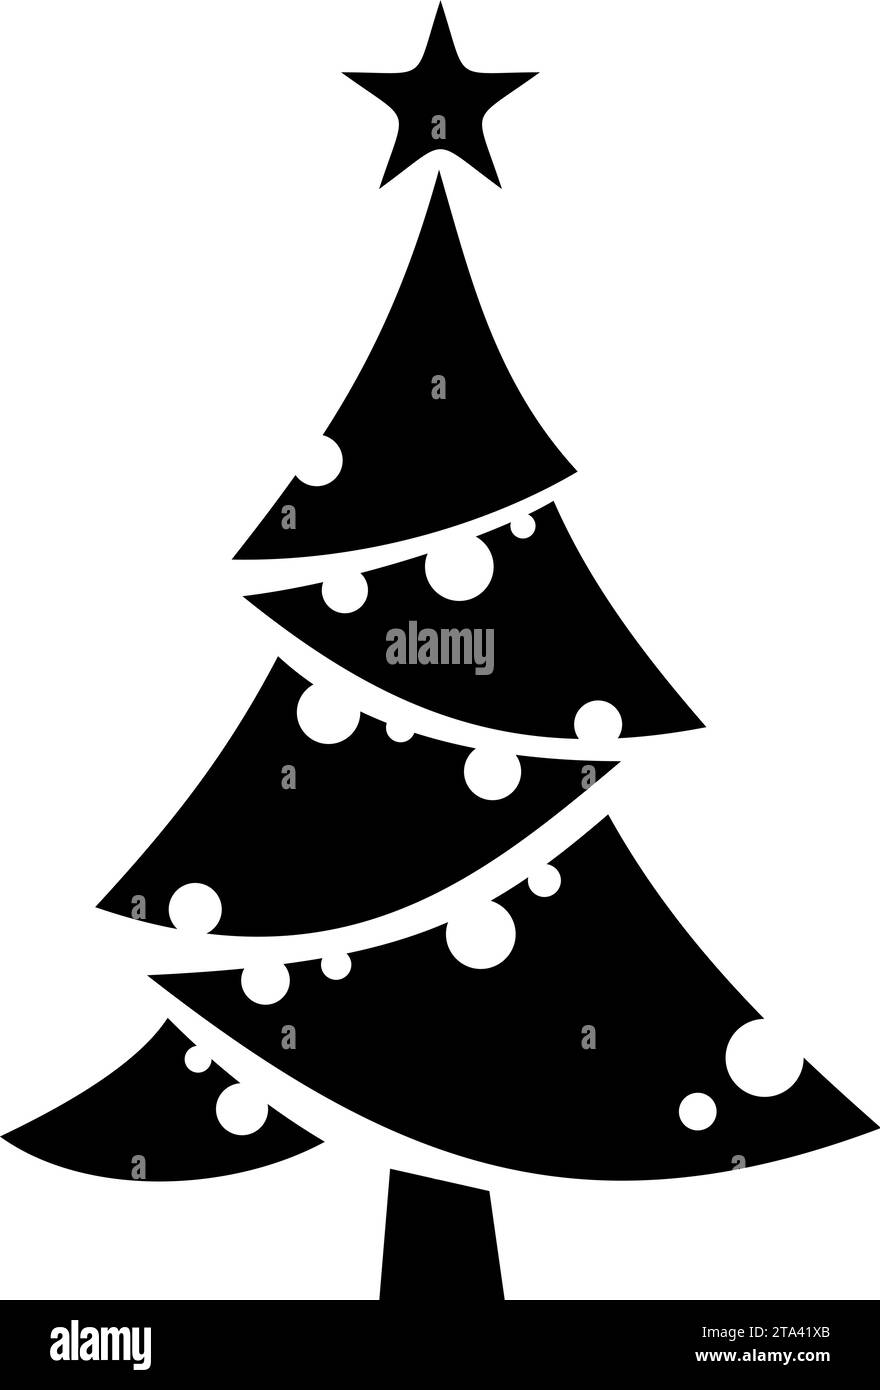 Christmas tree. Black silhouette of a Christmas tree isolated on a white background. Vector illustration Stock Vector